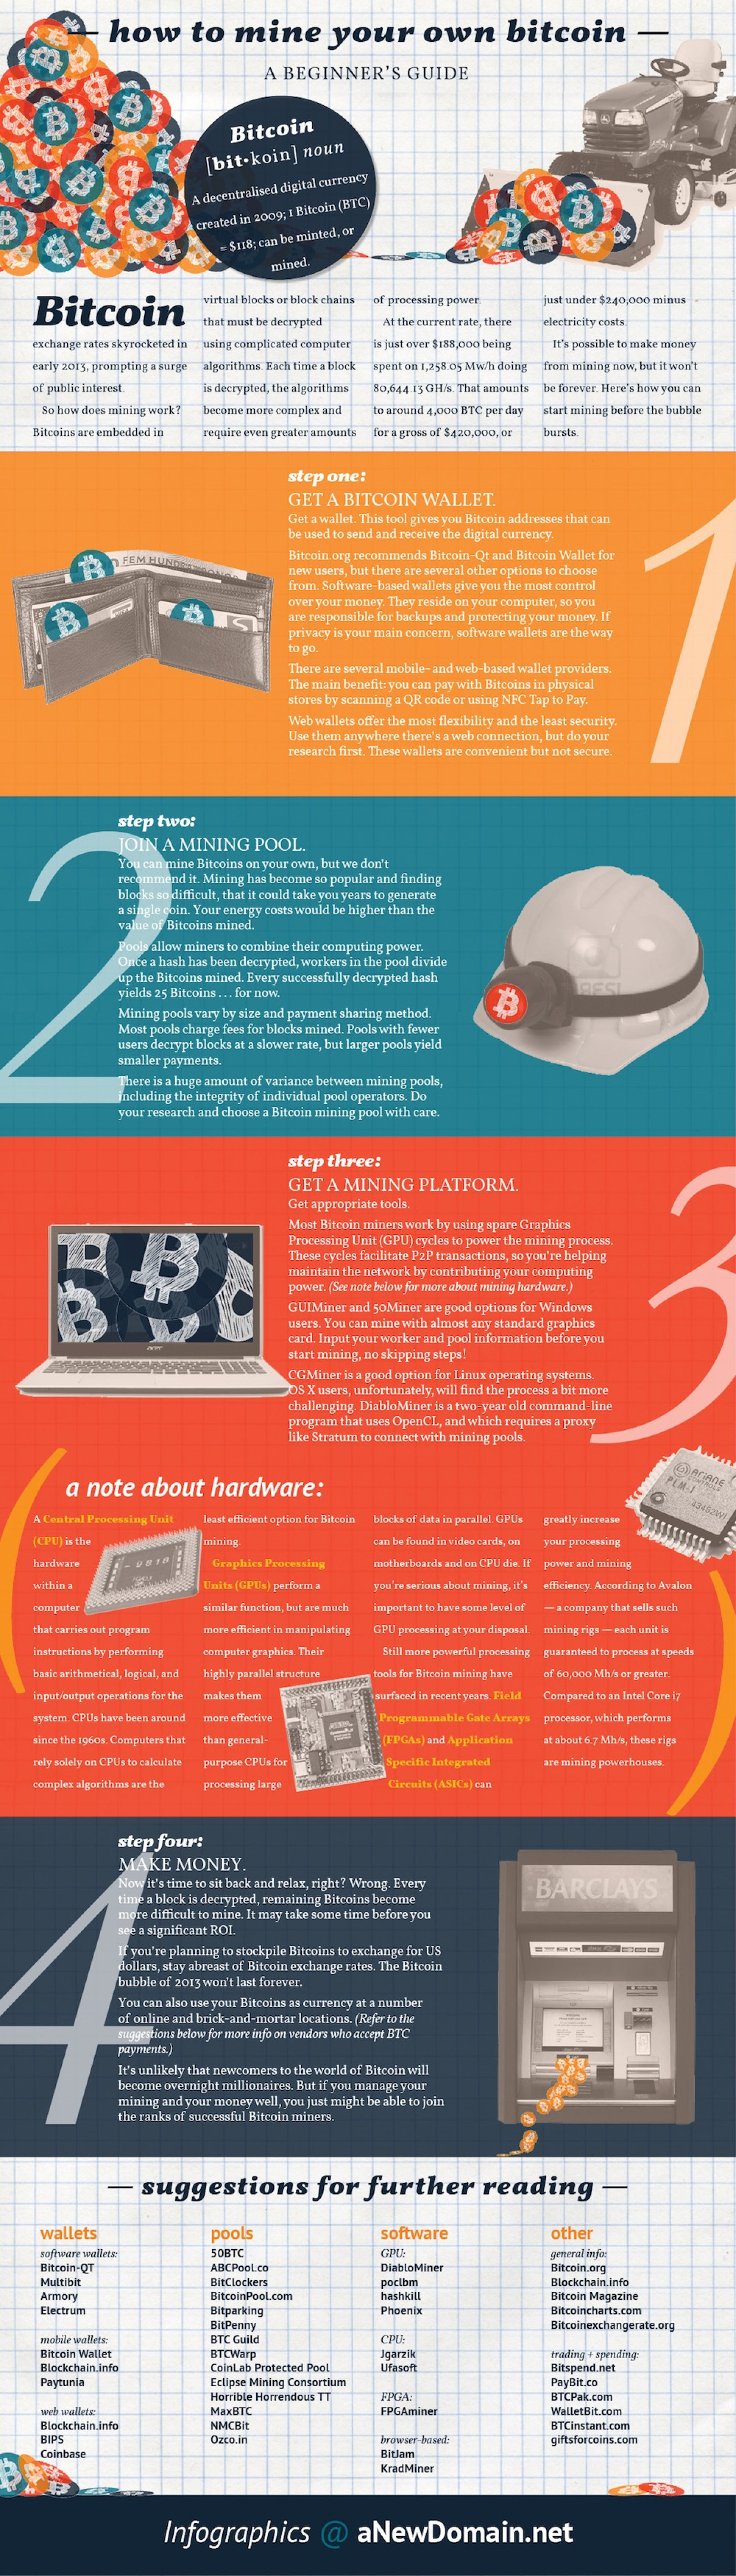 How to Mine Your Own Bitcoin  Infographic